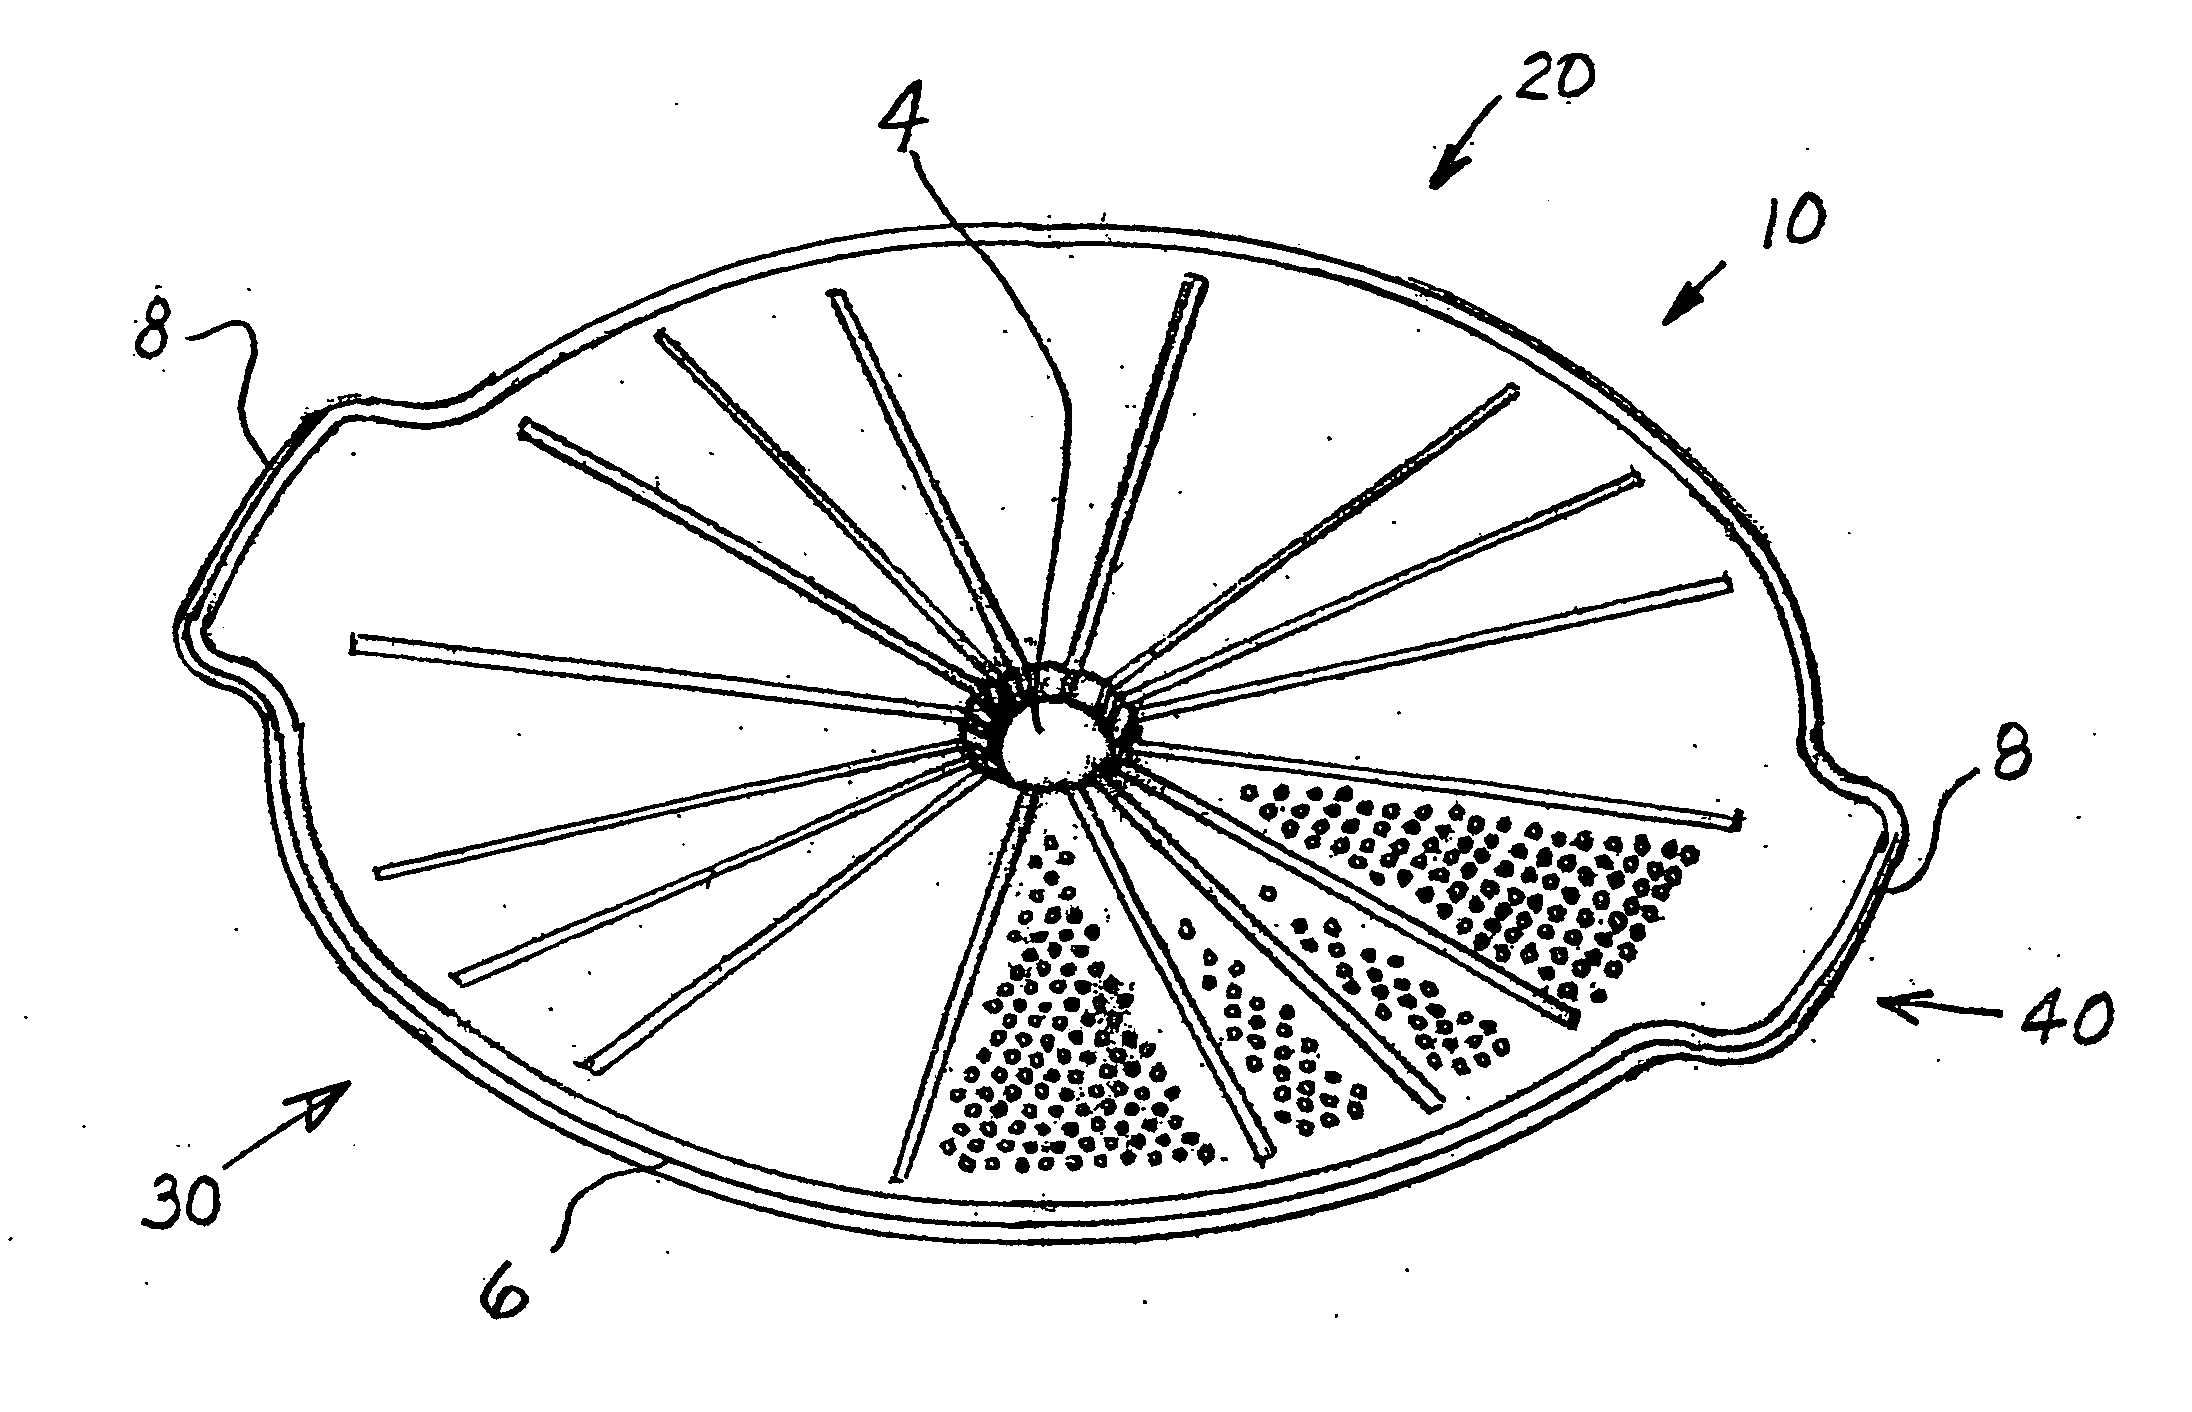 Apparatus for baking, cutting and serving